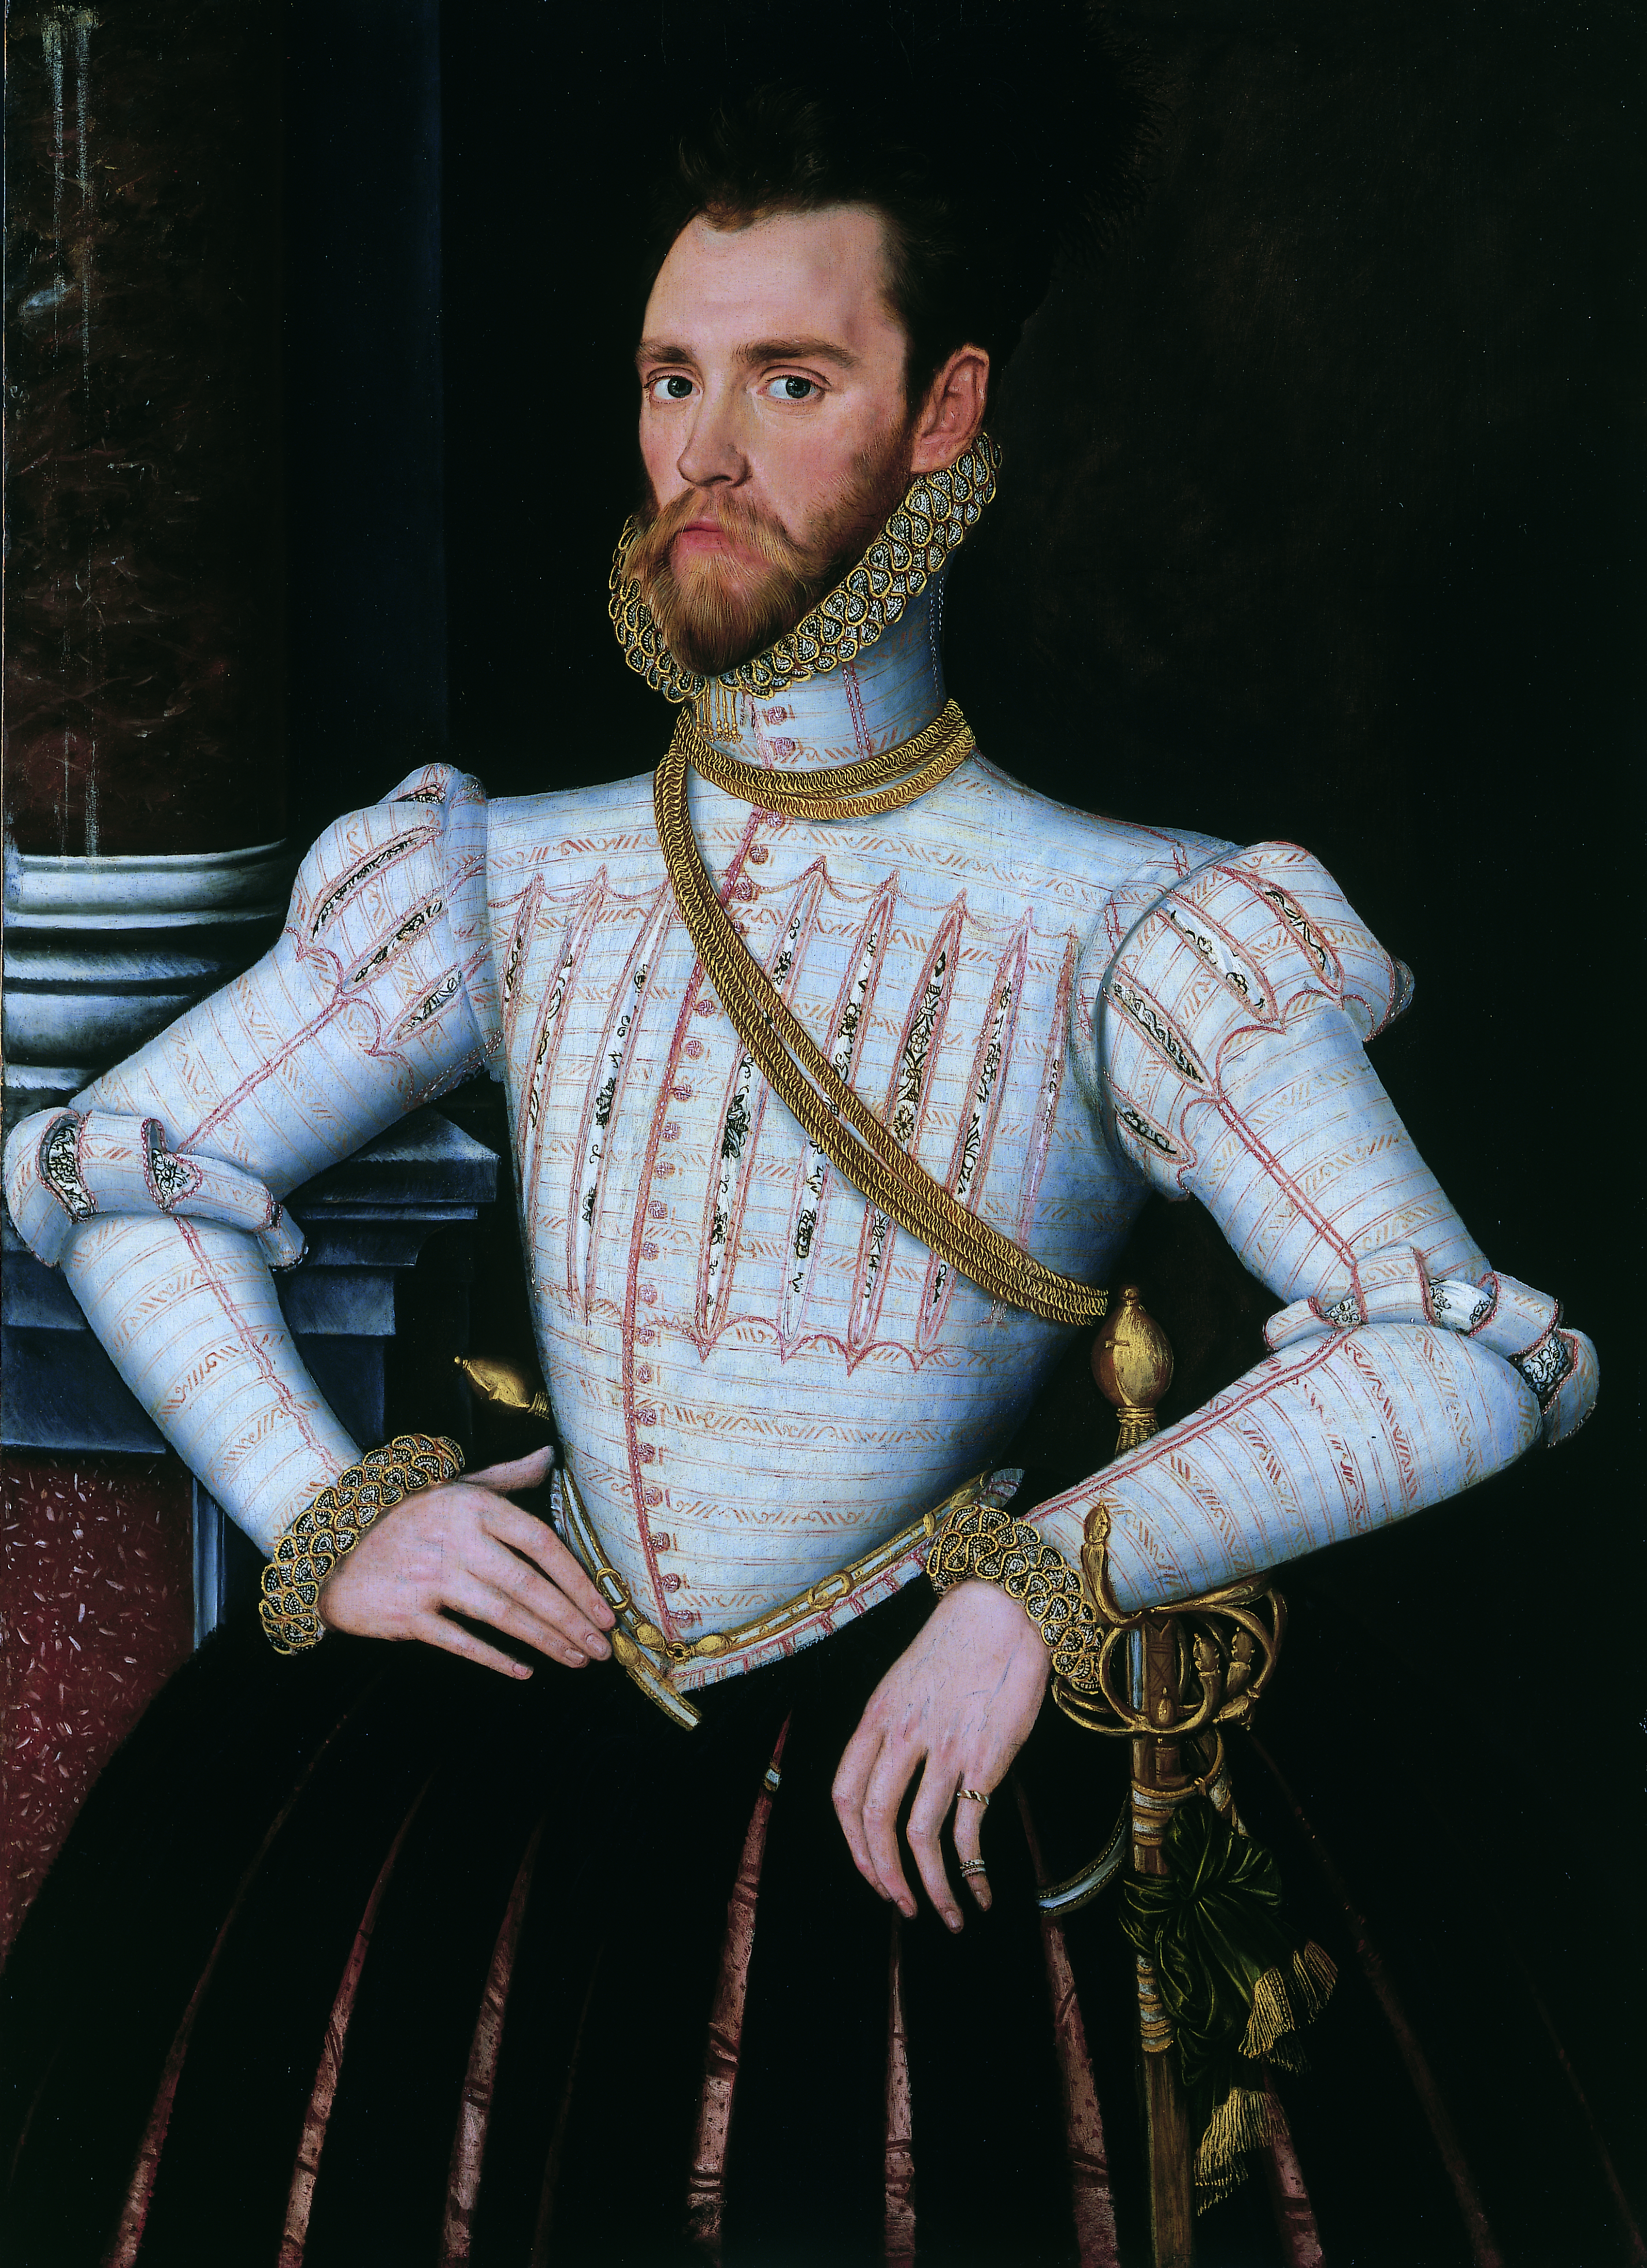 ca. 1569, oil on panel, 99.1 x 71.7 cm. Collection of Compton Verney, Warwickshire (CVCSC : 0257.B).